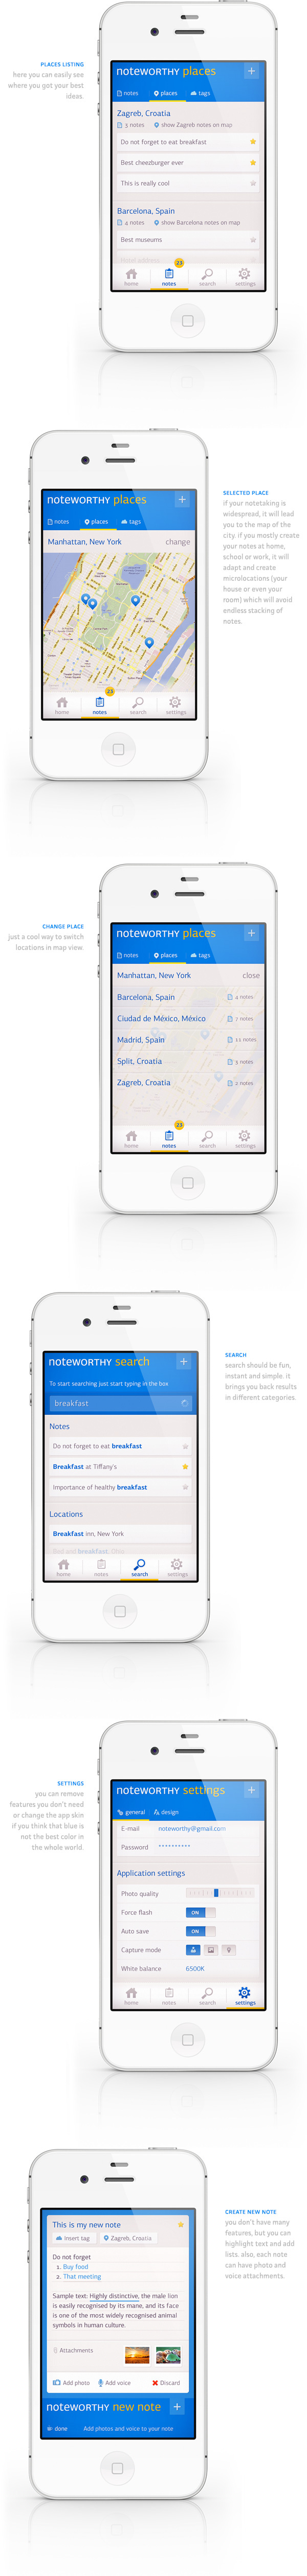 app note iphone interactive Interface  UI  UX menu  unity twitter notetaking concept  login  Map geolocation